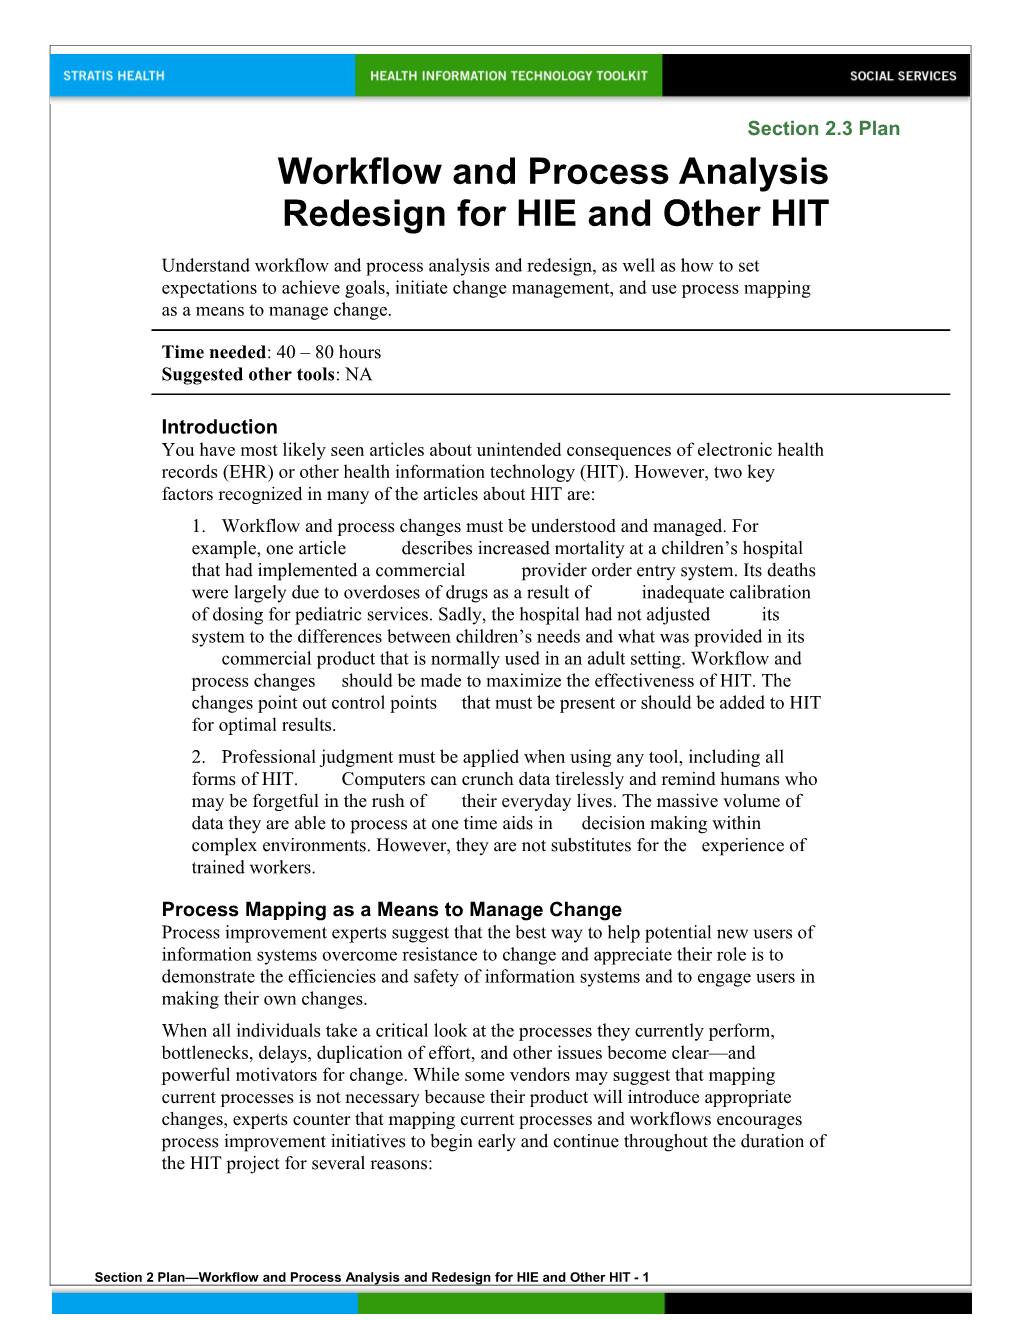 2 Workflow and Process Analysis and Redesign for HIE and Other HIT